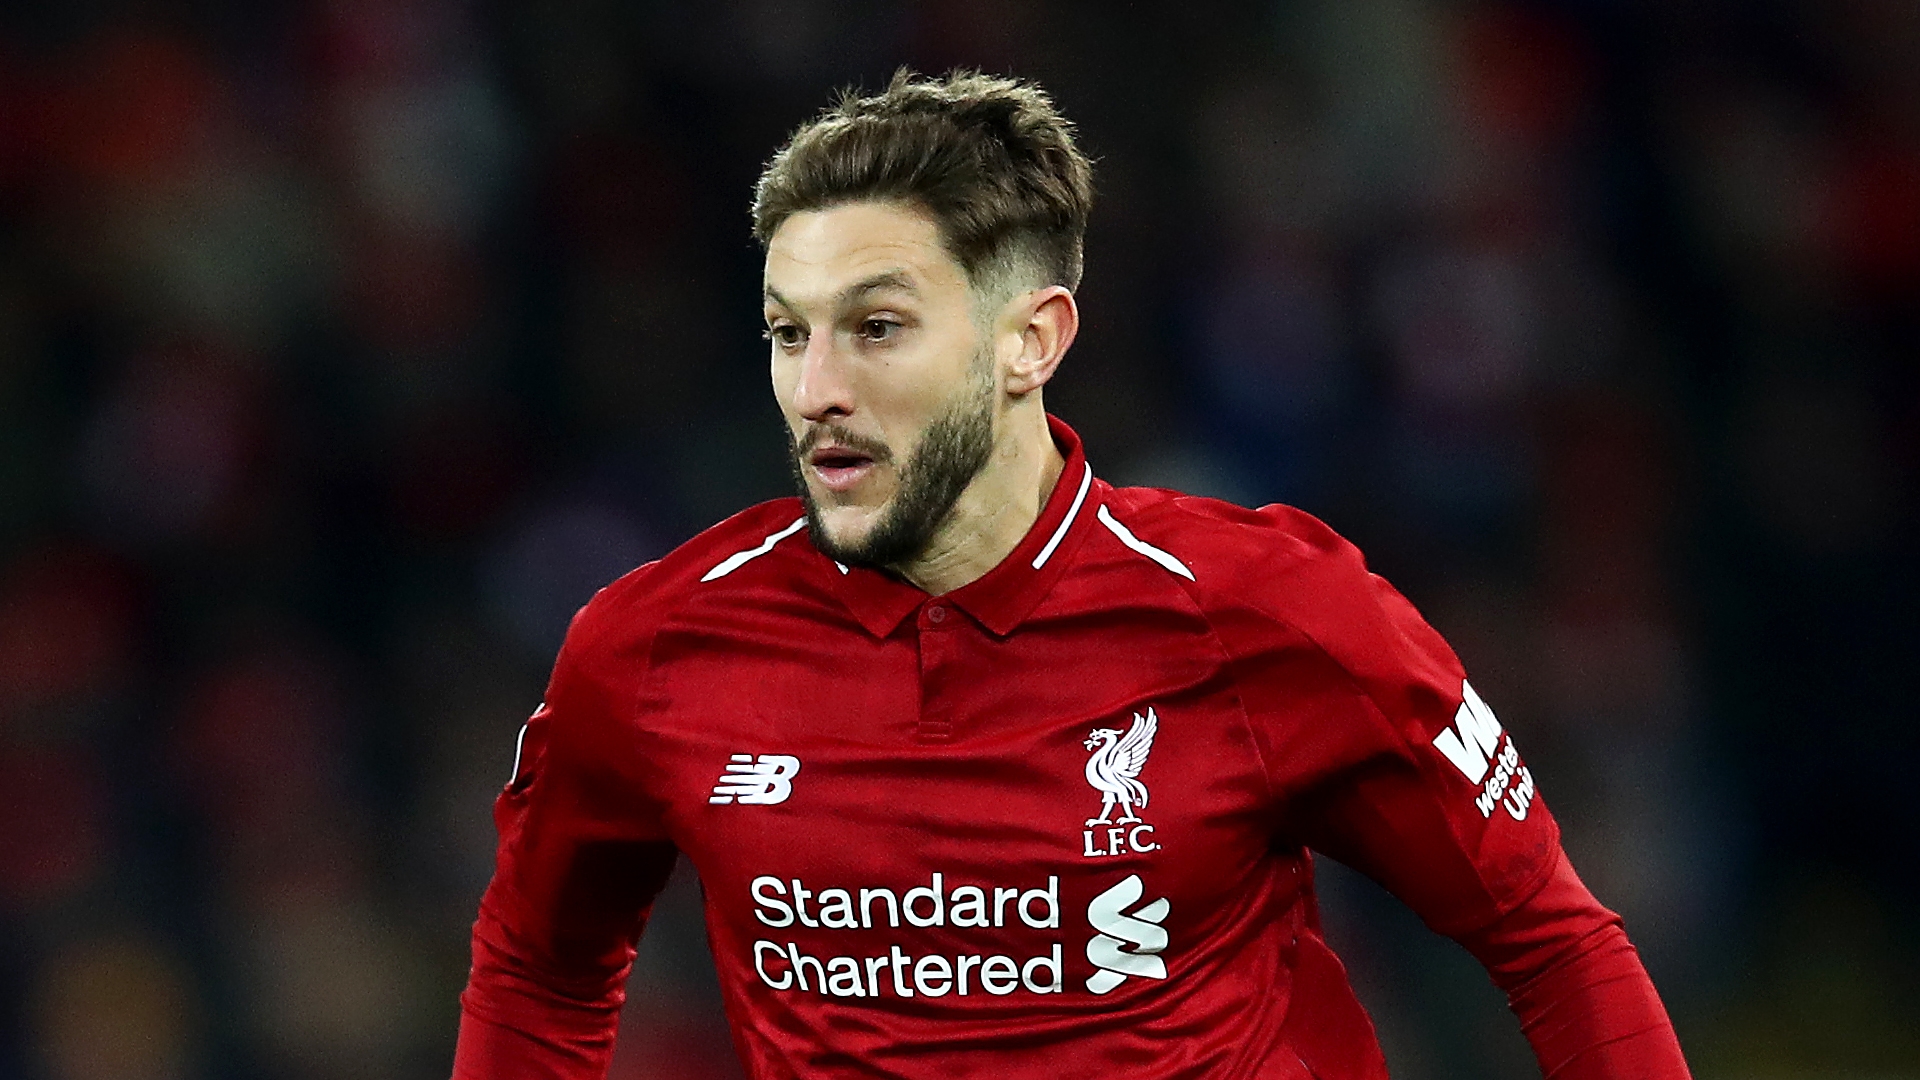 Sarri might make an offer! - Klopp pleased with Lallana's performance in 'Jorginho role'